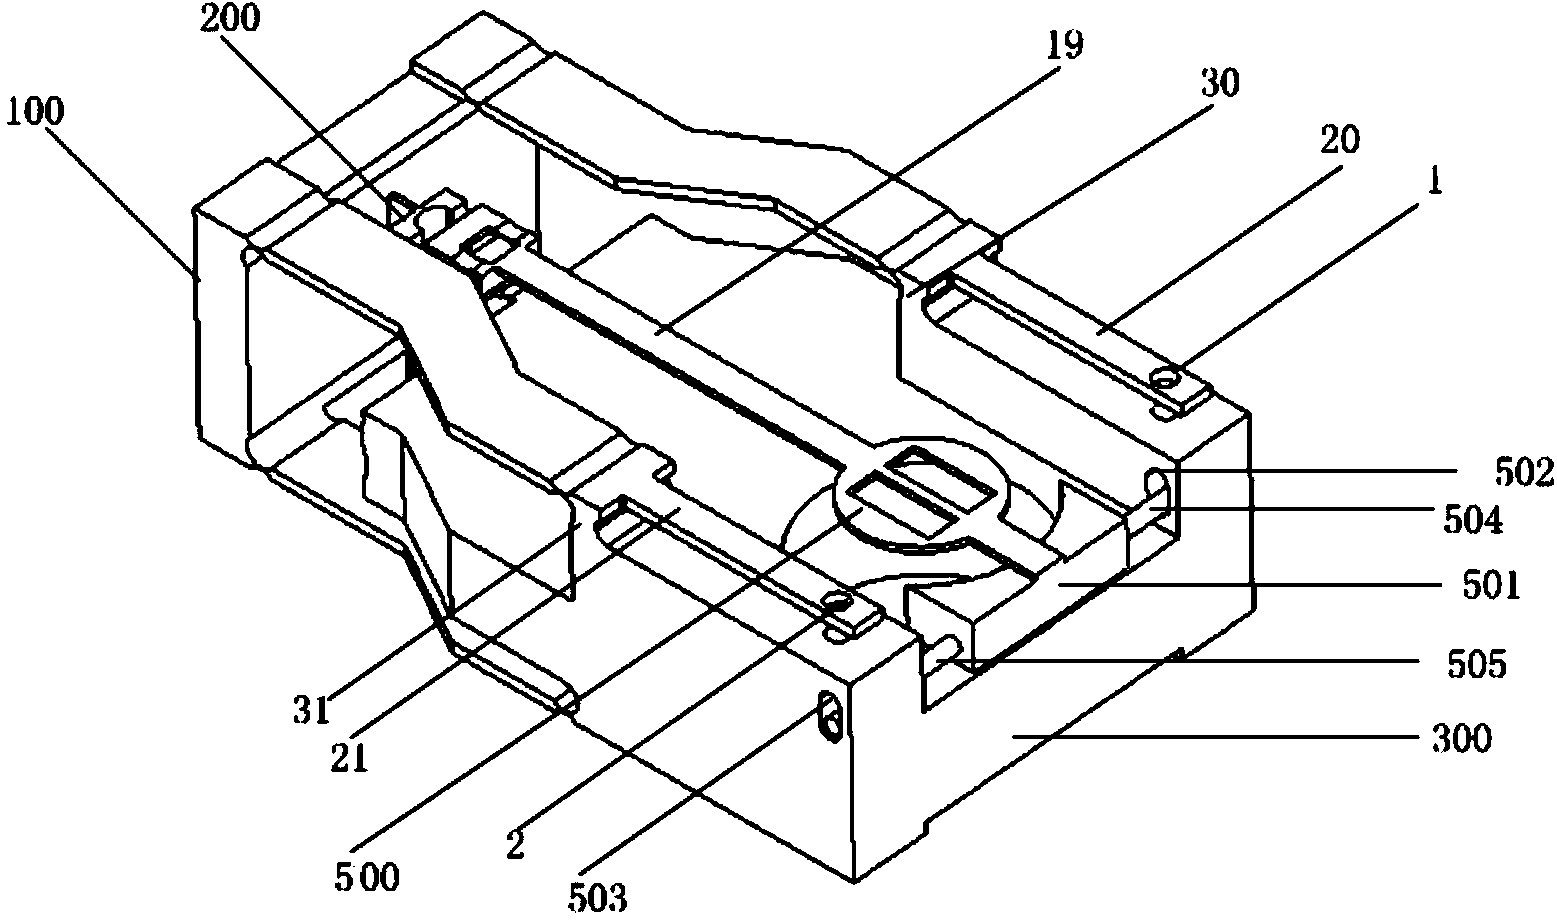 Single sensor mechanical structure for weighing